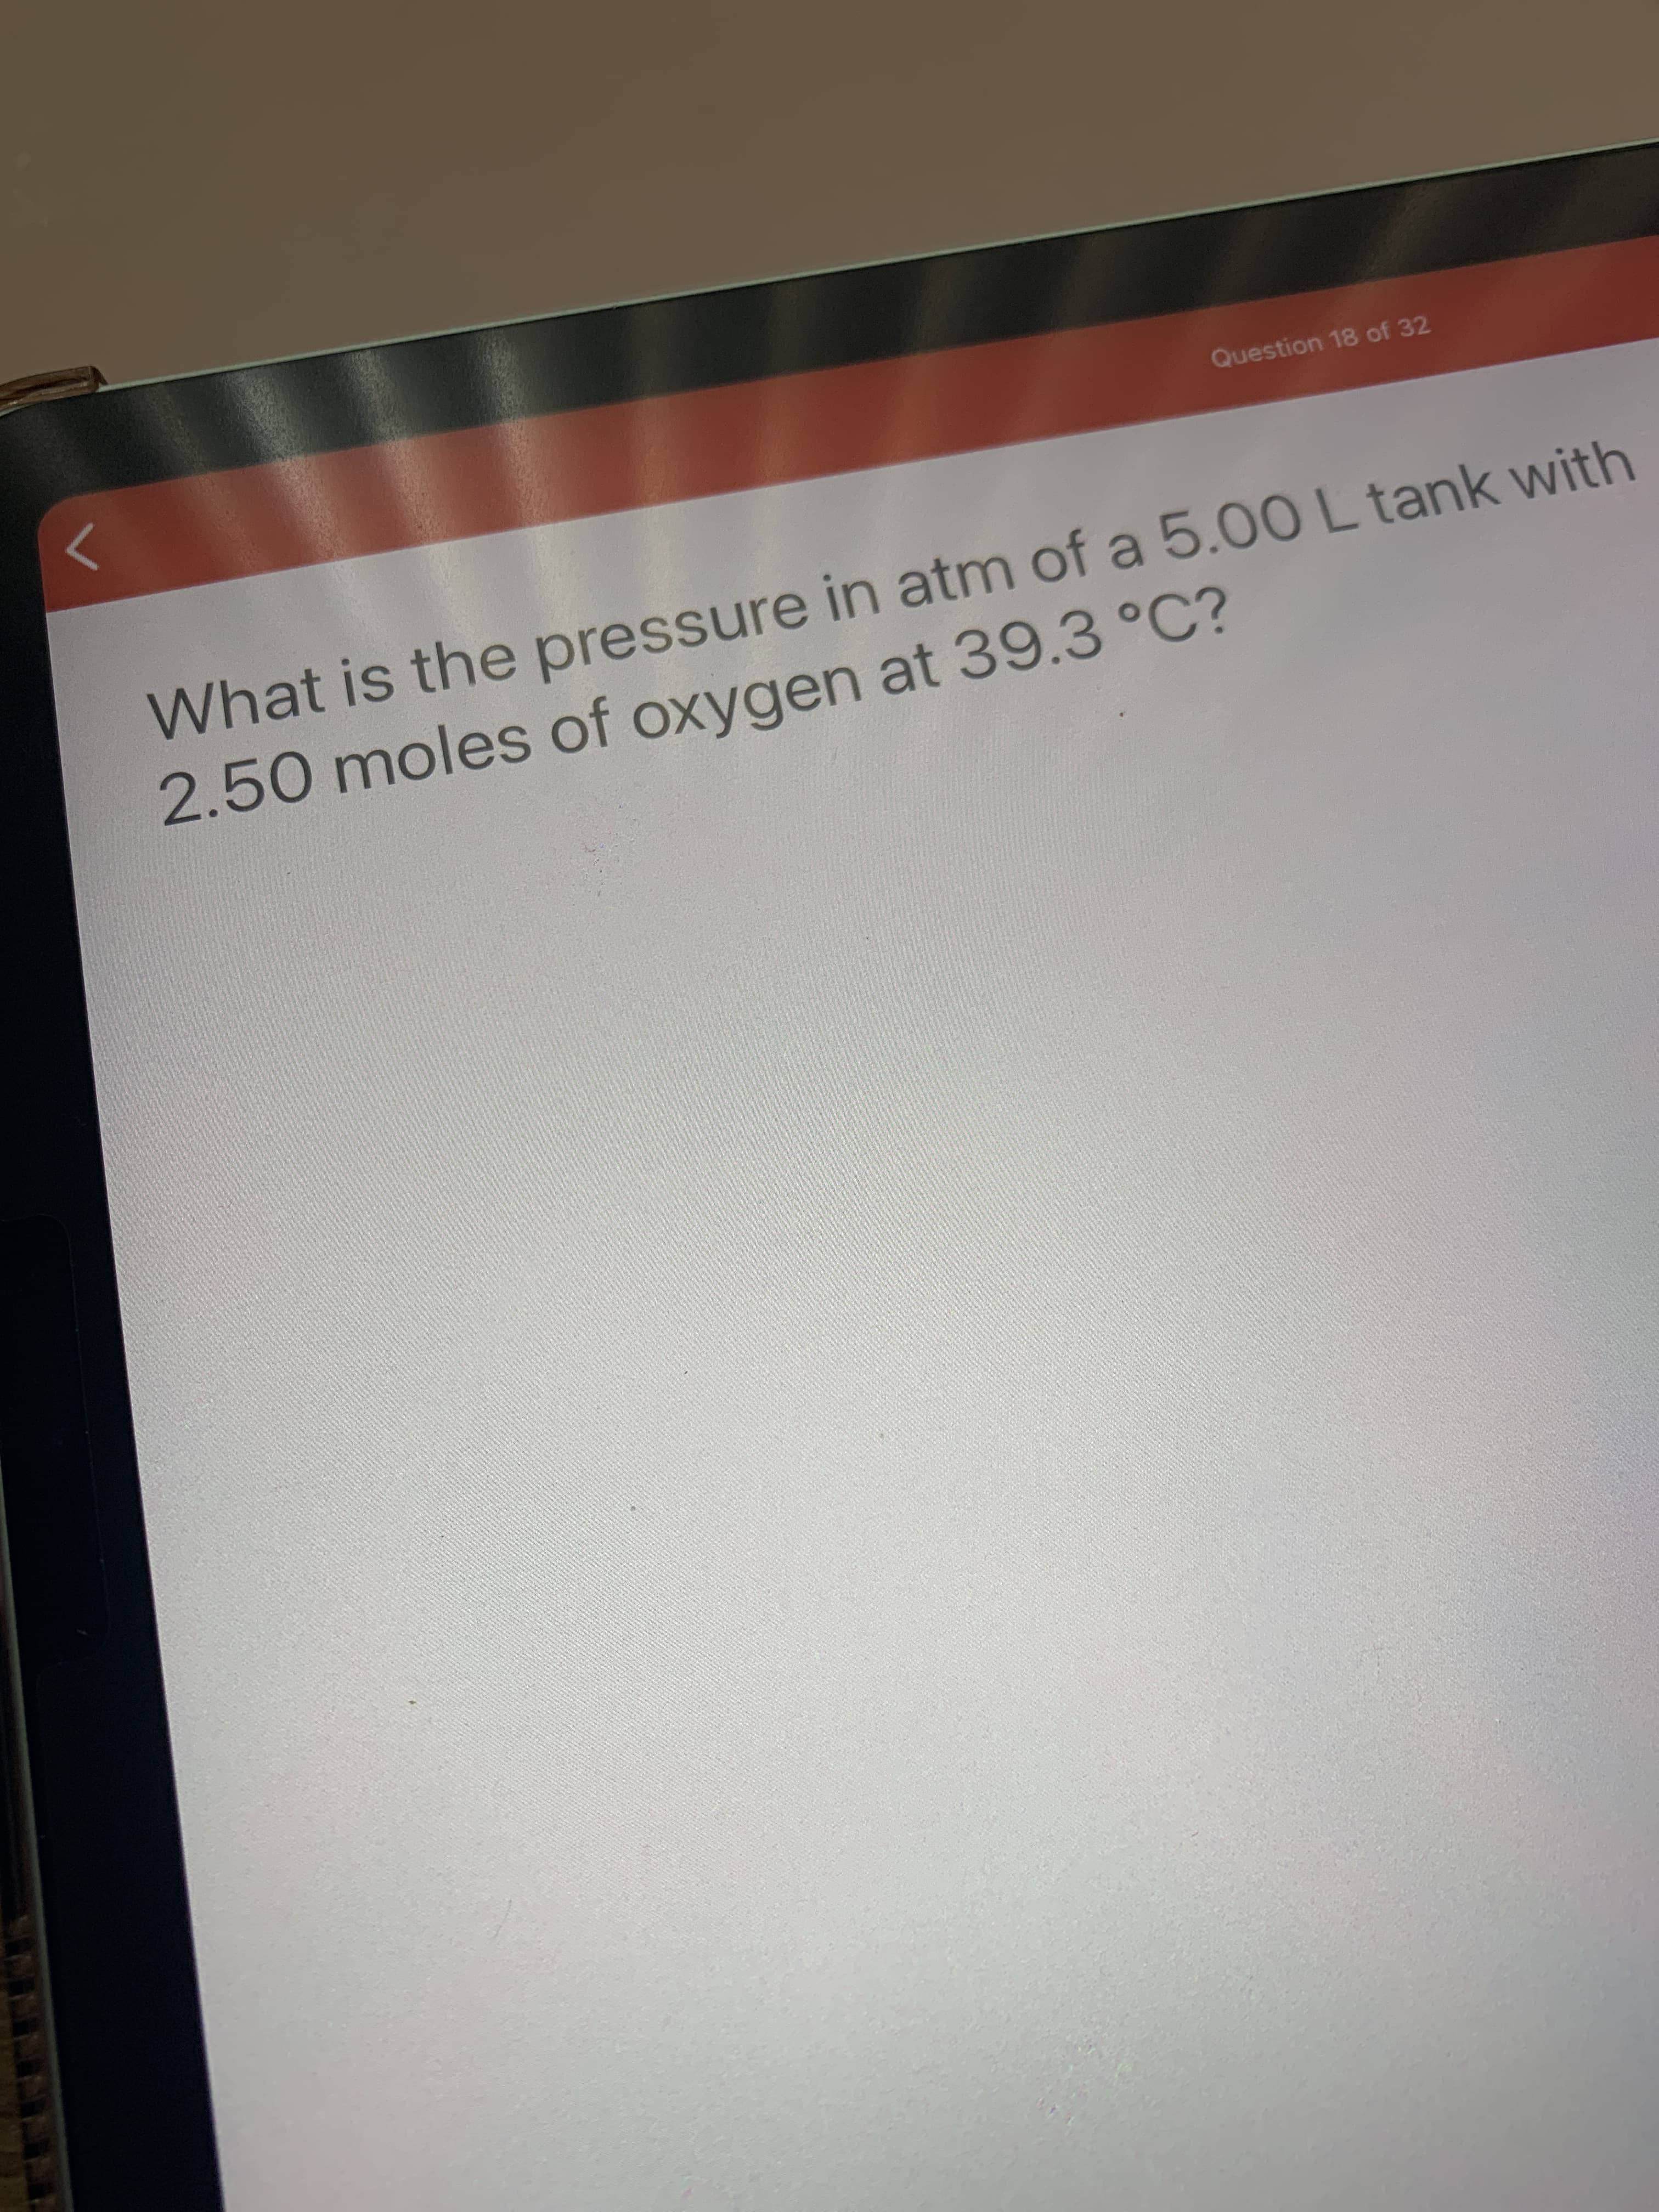 What is the pressure in atm of a 5.00 L tank with
2.50 moles of oxygen at 39.3 °C?
